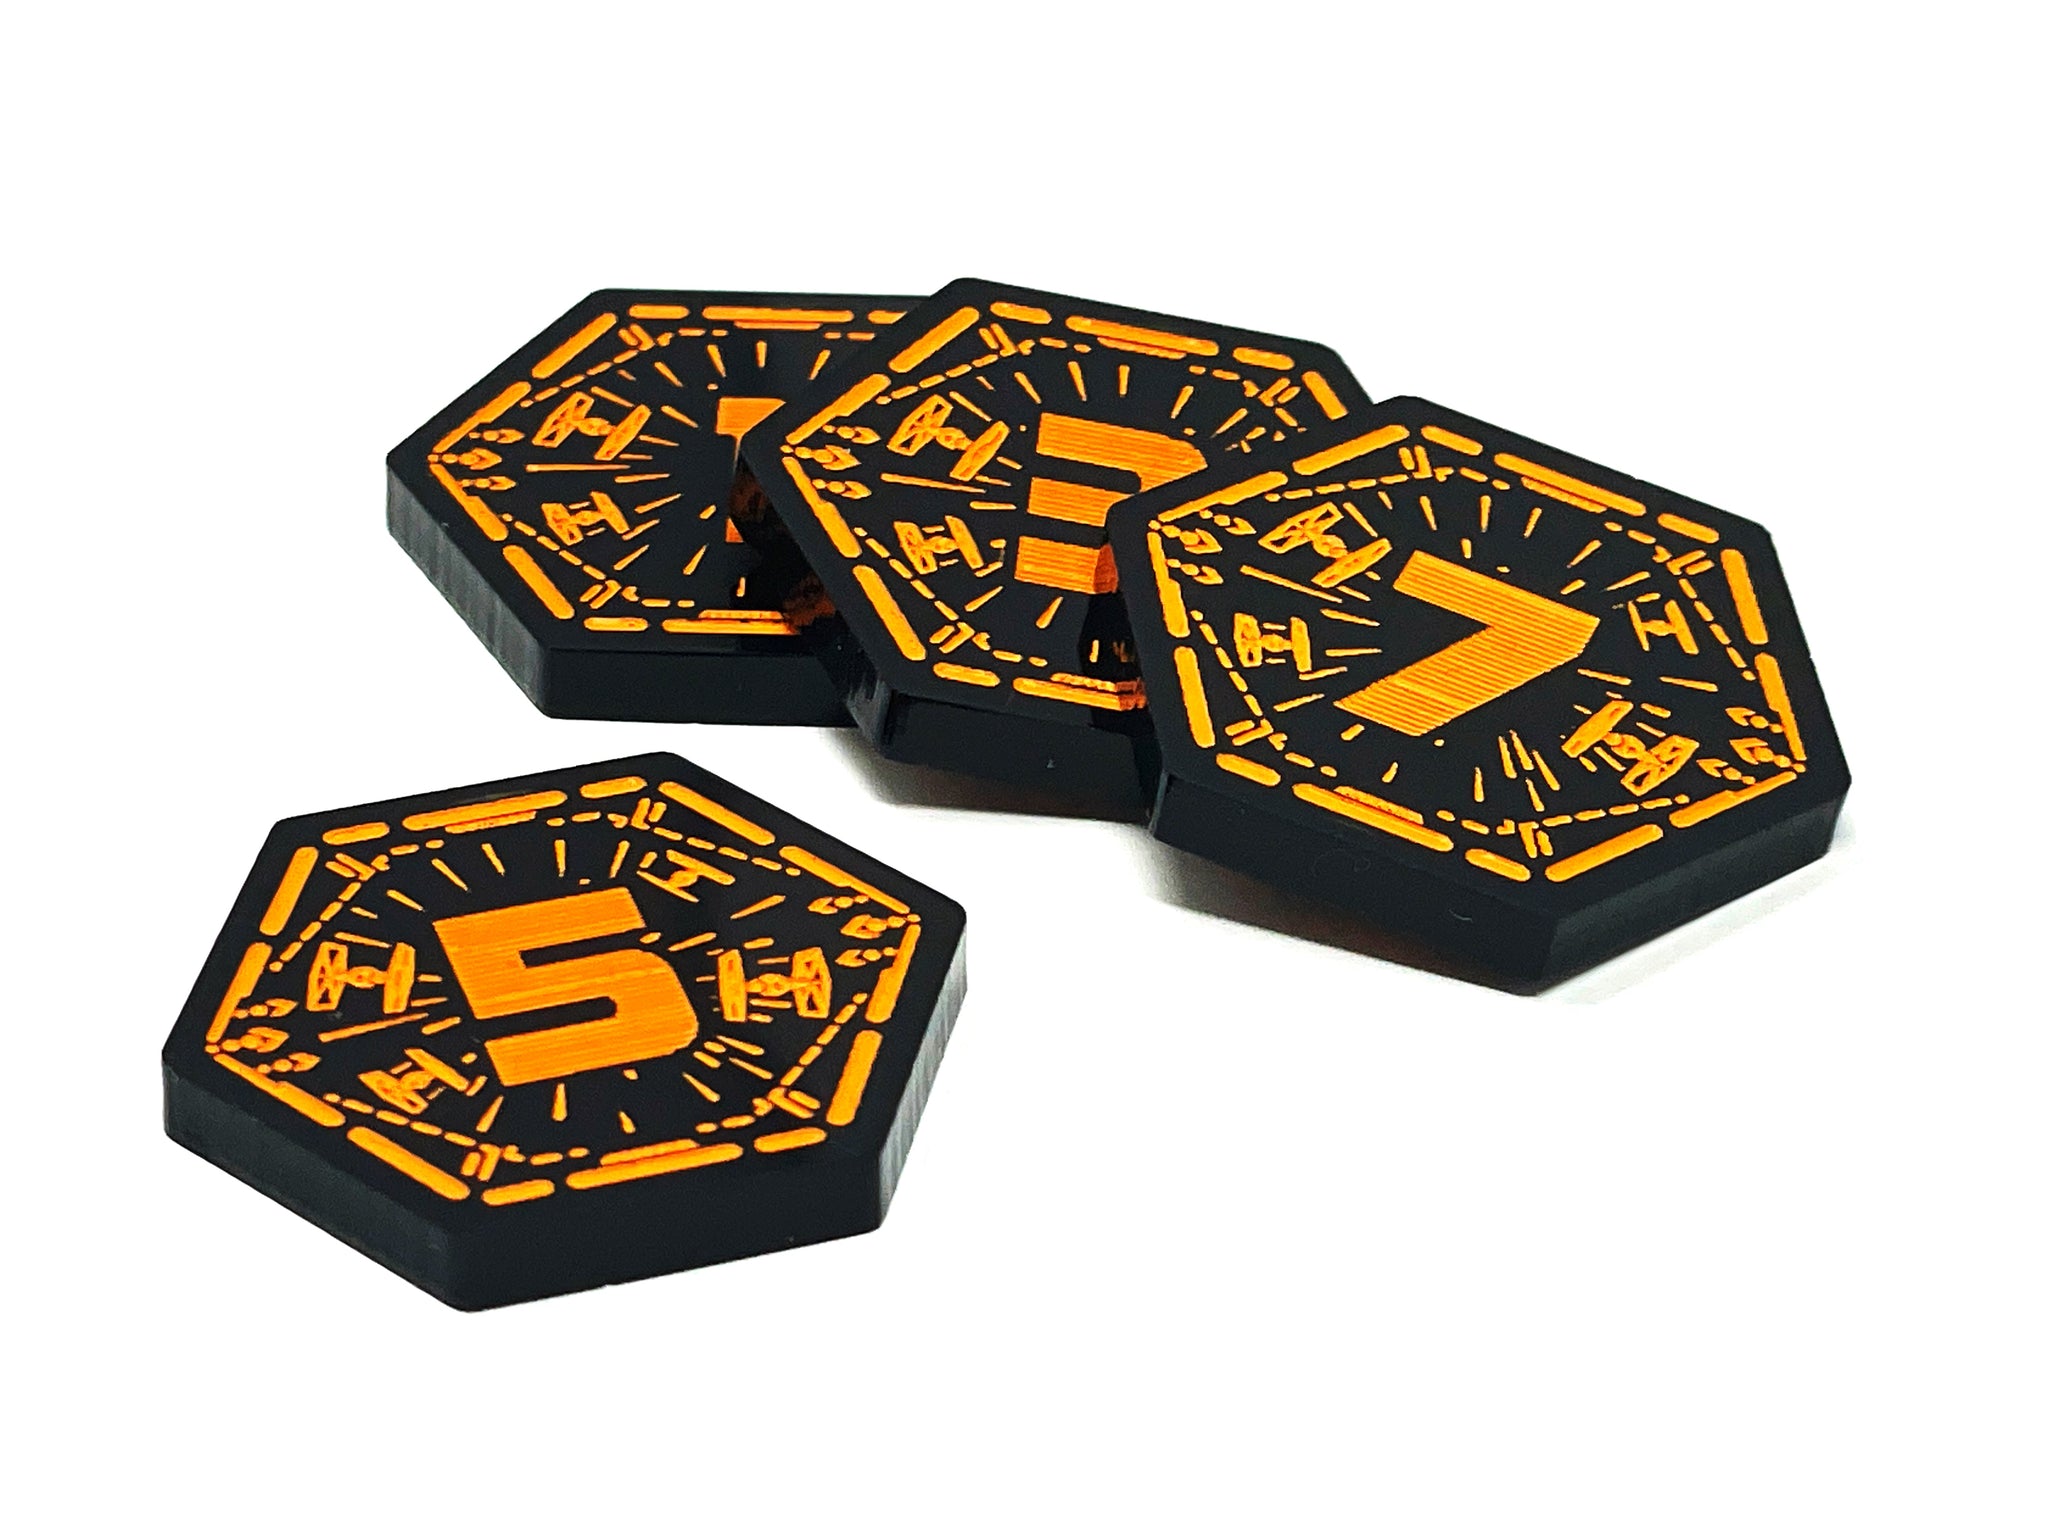 4 x Initiative Tokens for Star Wars X-wing 2.5